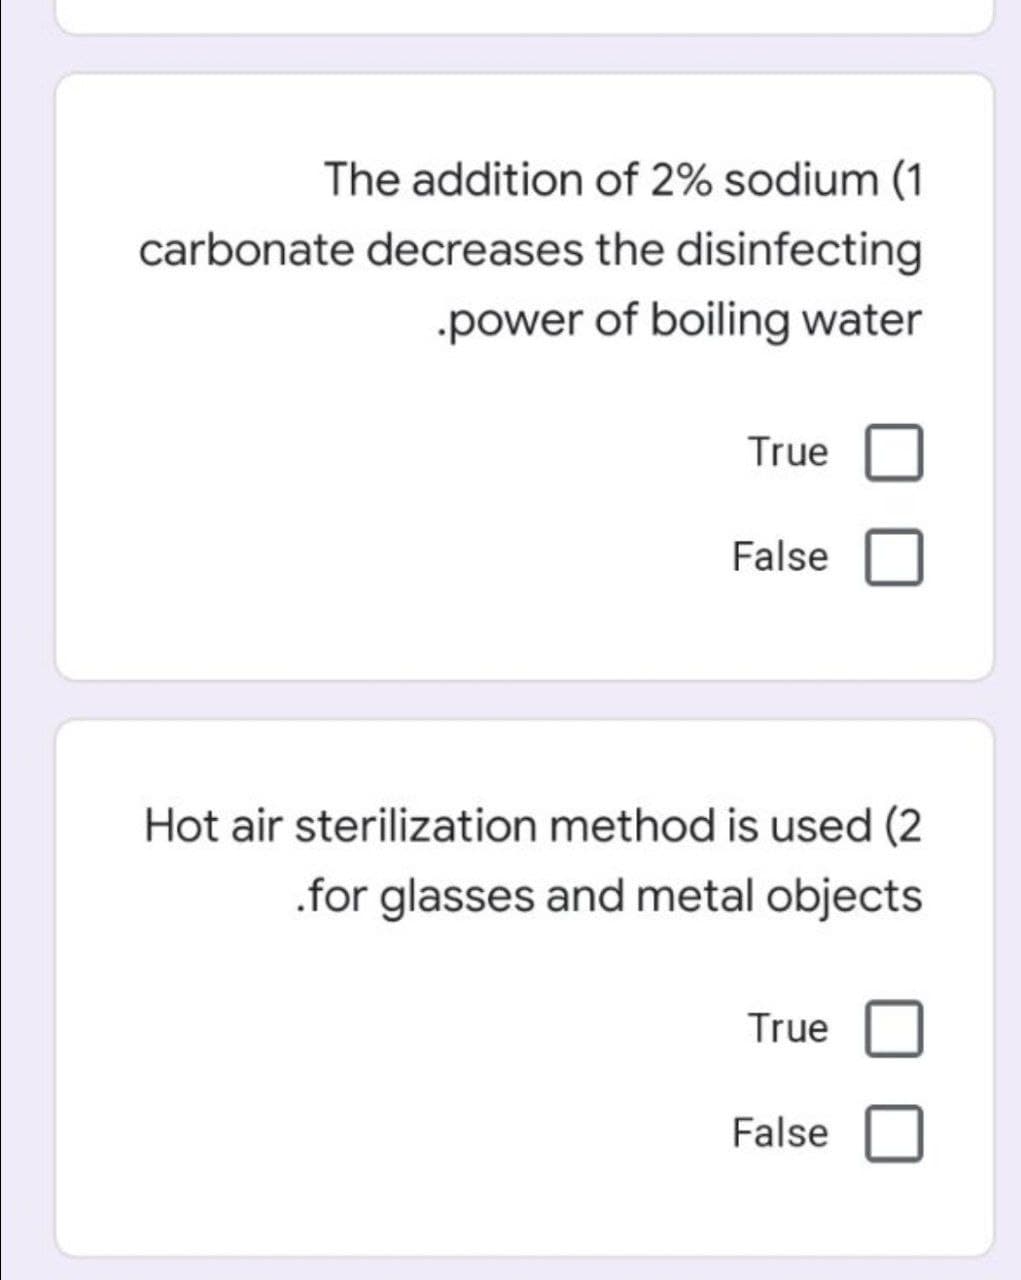 The addition of 2% sodium (1
carbonate decreases the disinfecting
power of boiling water
True
False
Hot air sterilization method is used (2
.for glasses and metal objects
True
False
